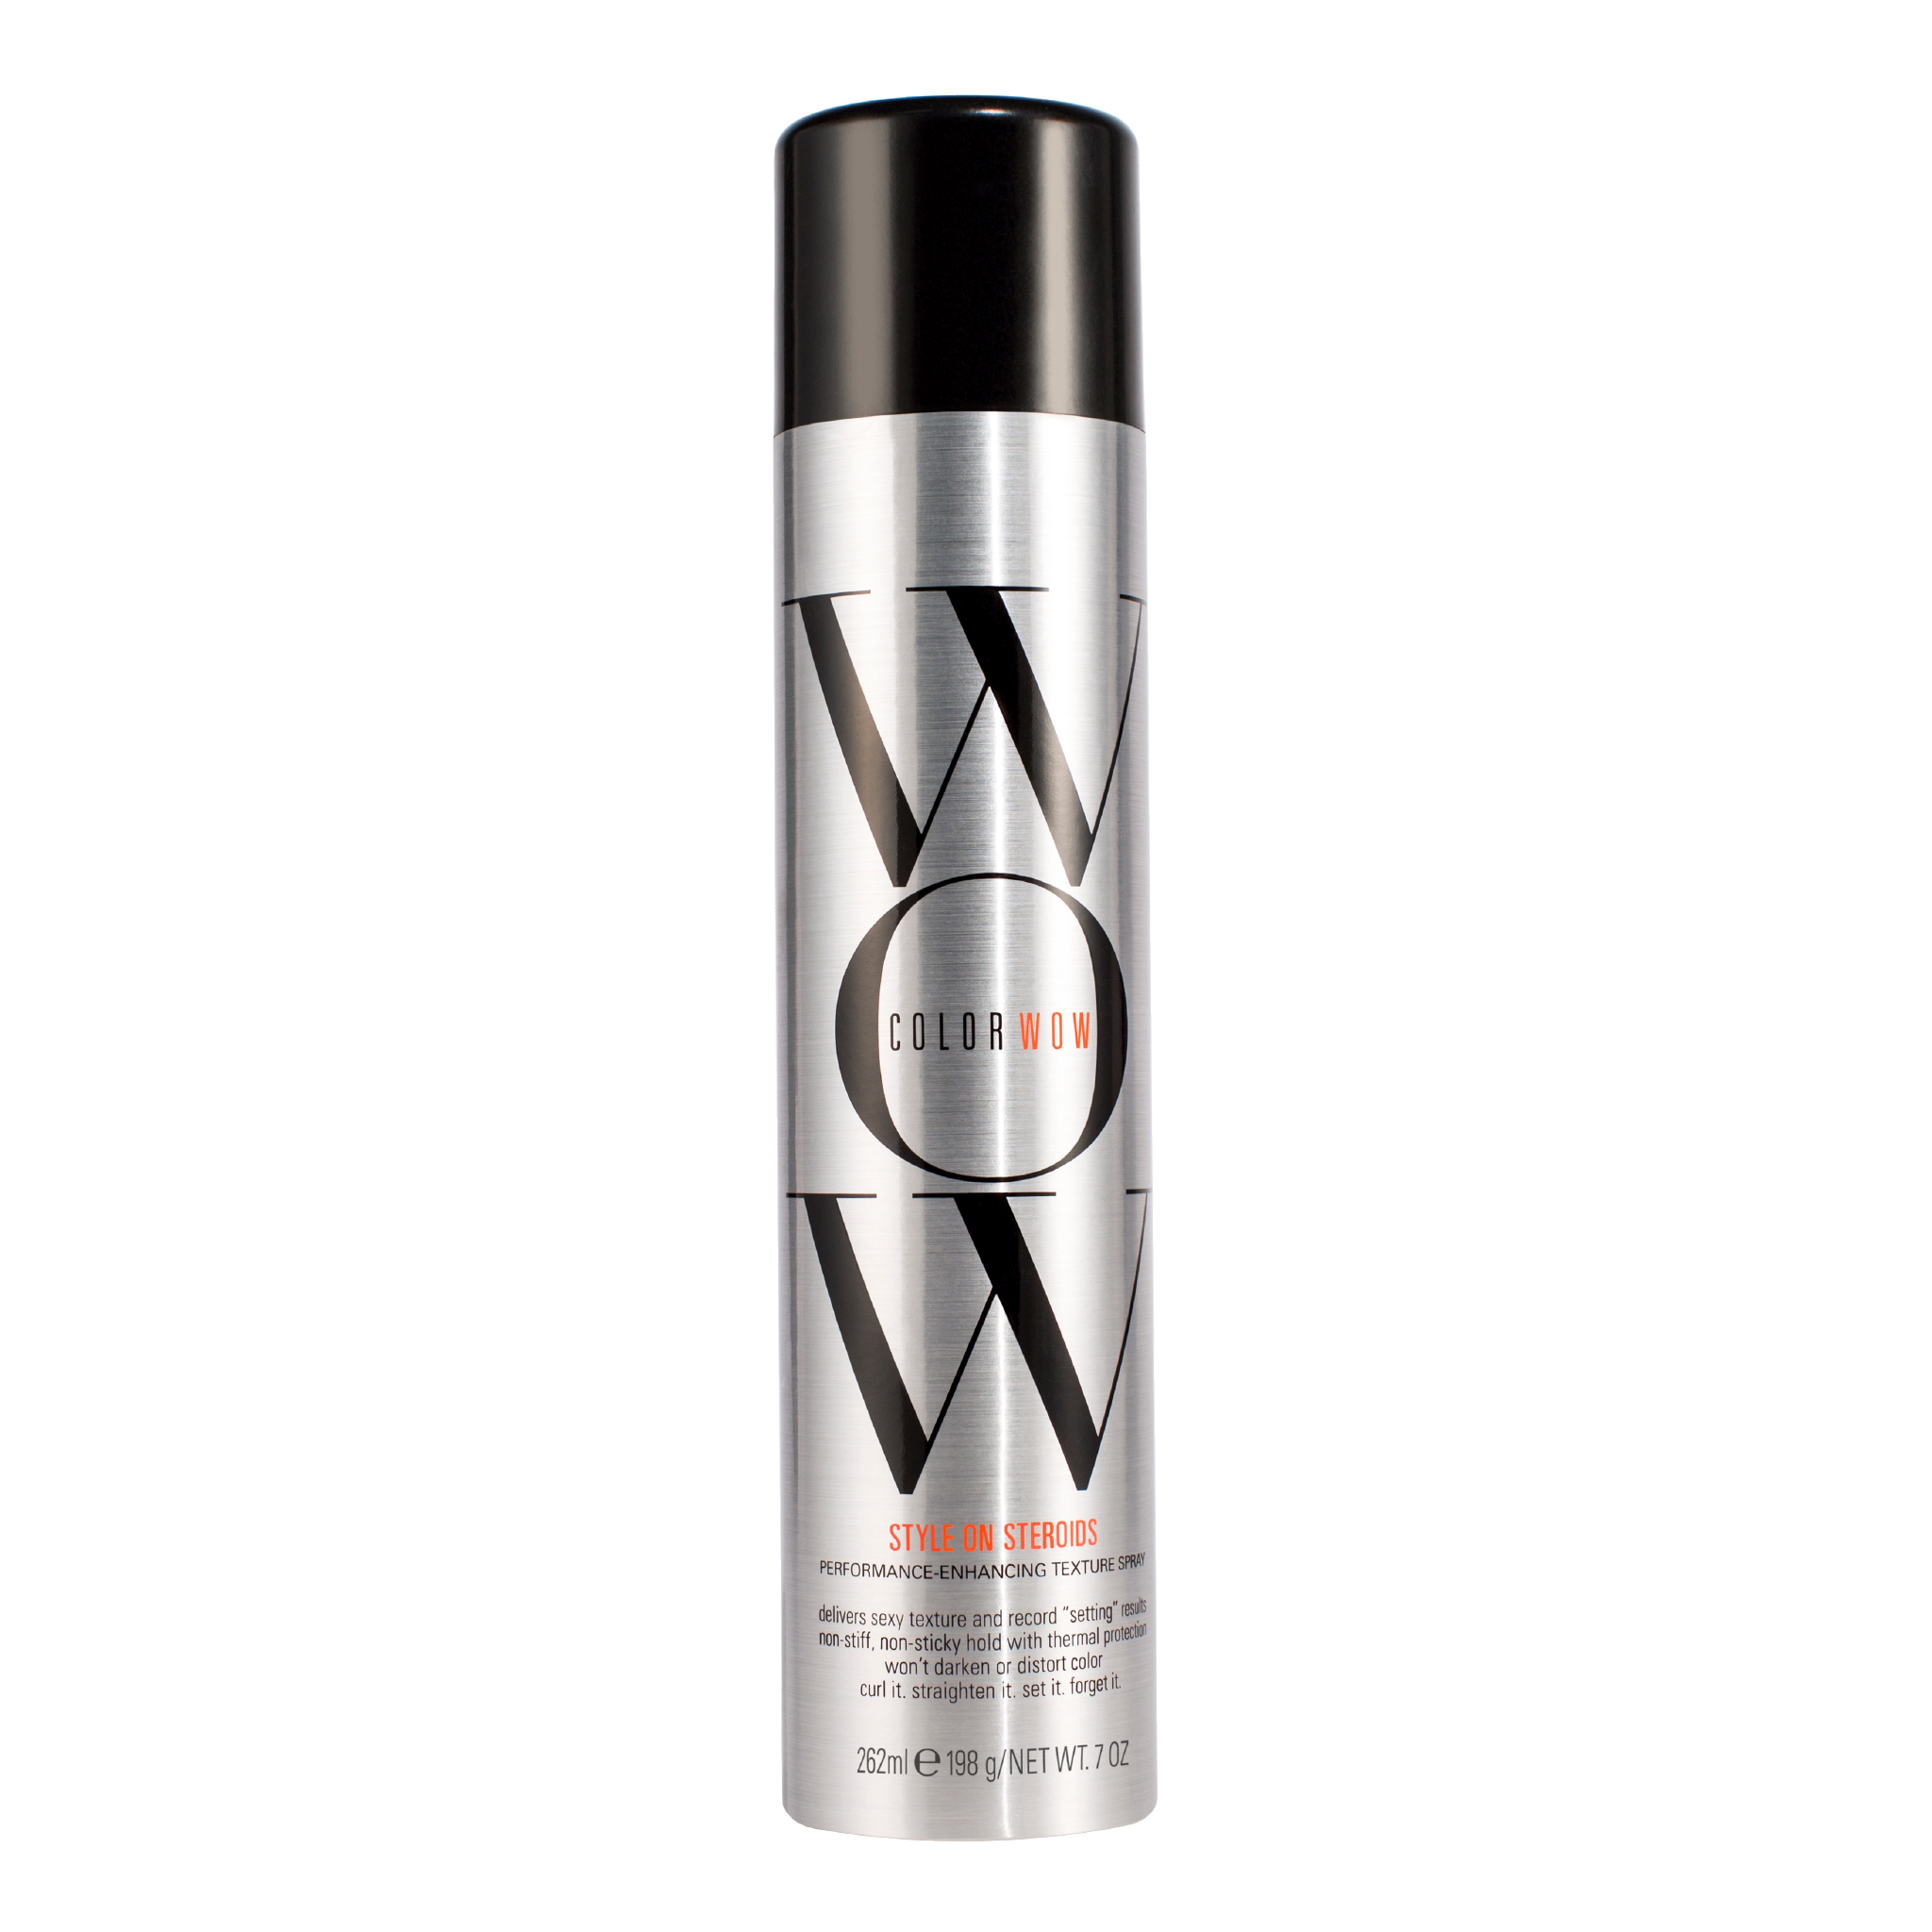 A texture spray that isn't sticky or chalky? 🤔 - Color Wow